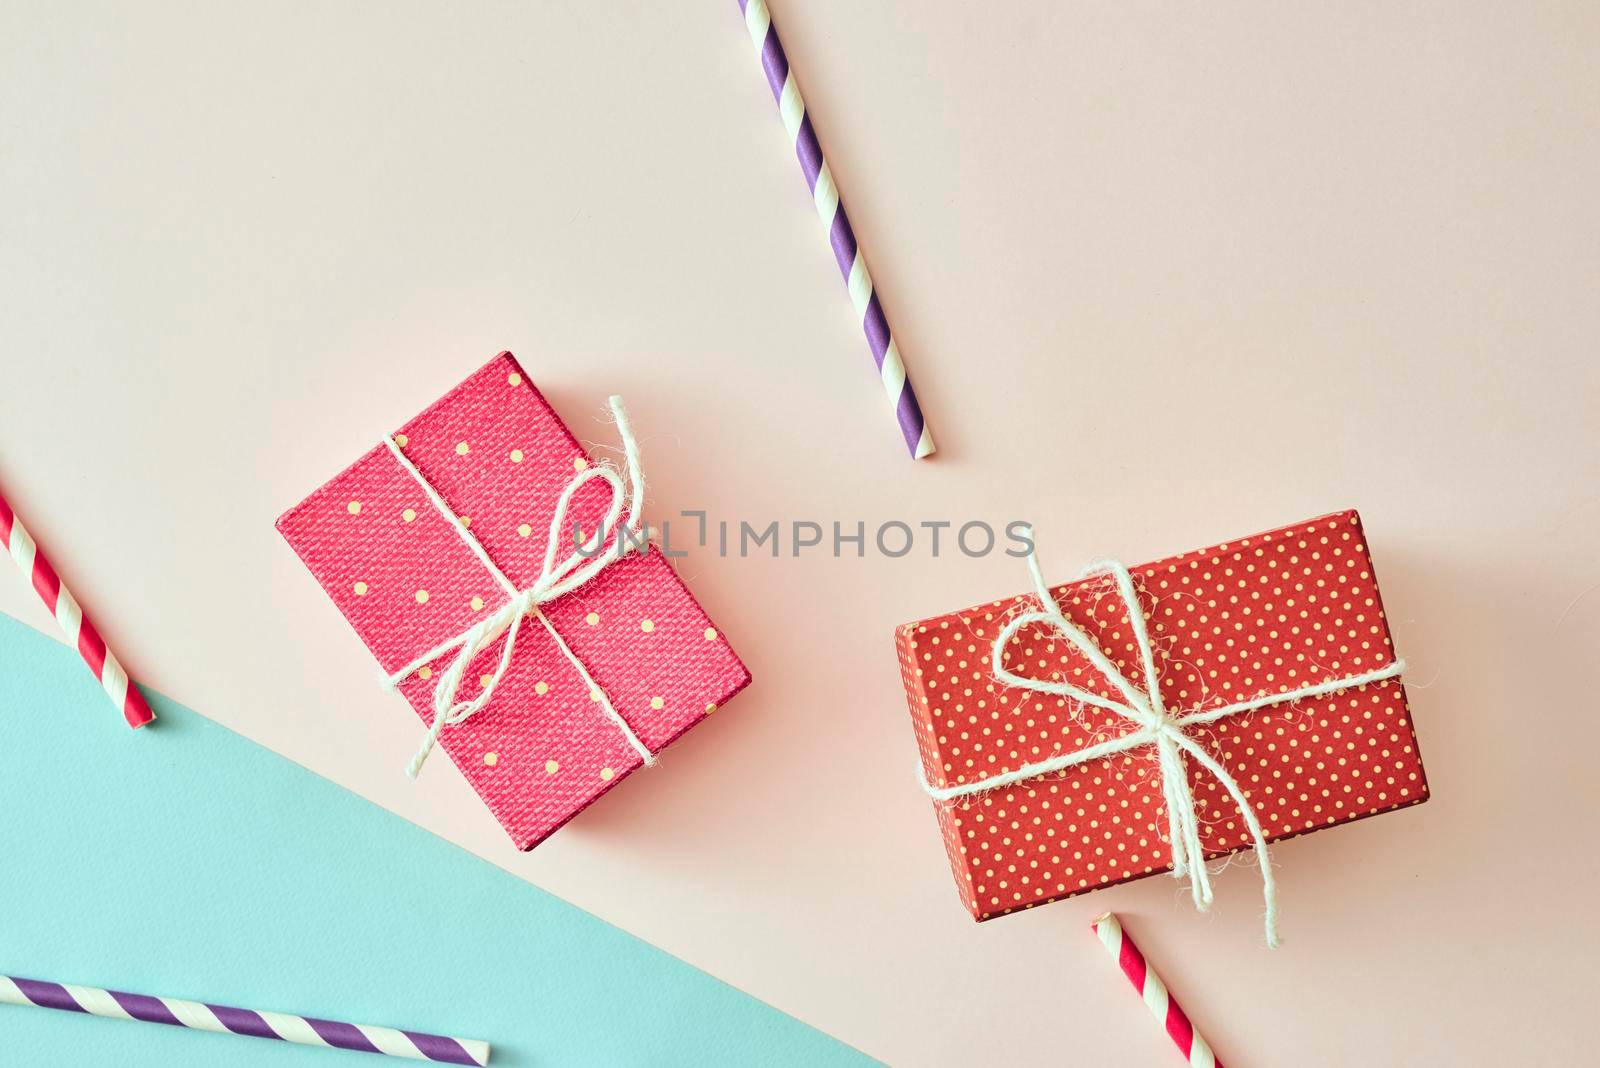 Two gift boxes wrapped in color purple and red polka dots paper on pink background. by makidotvn